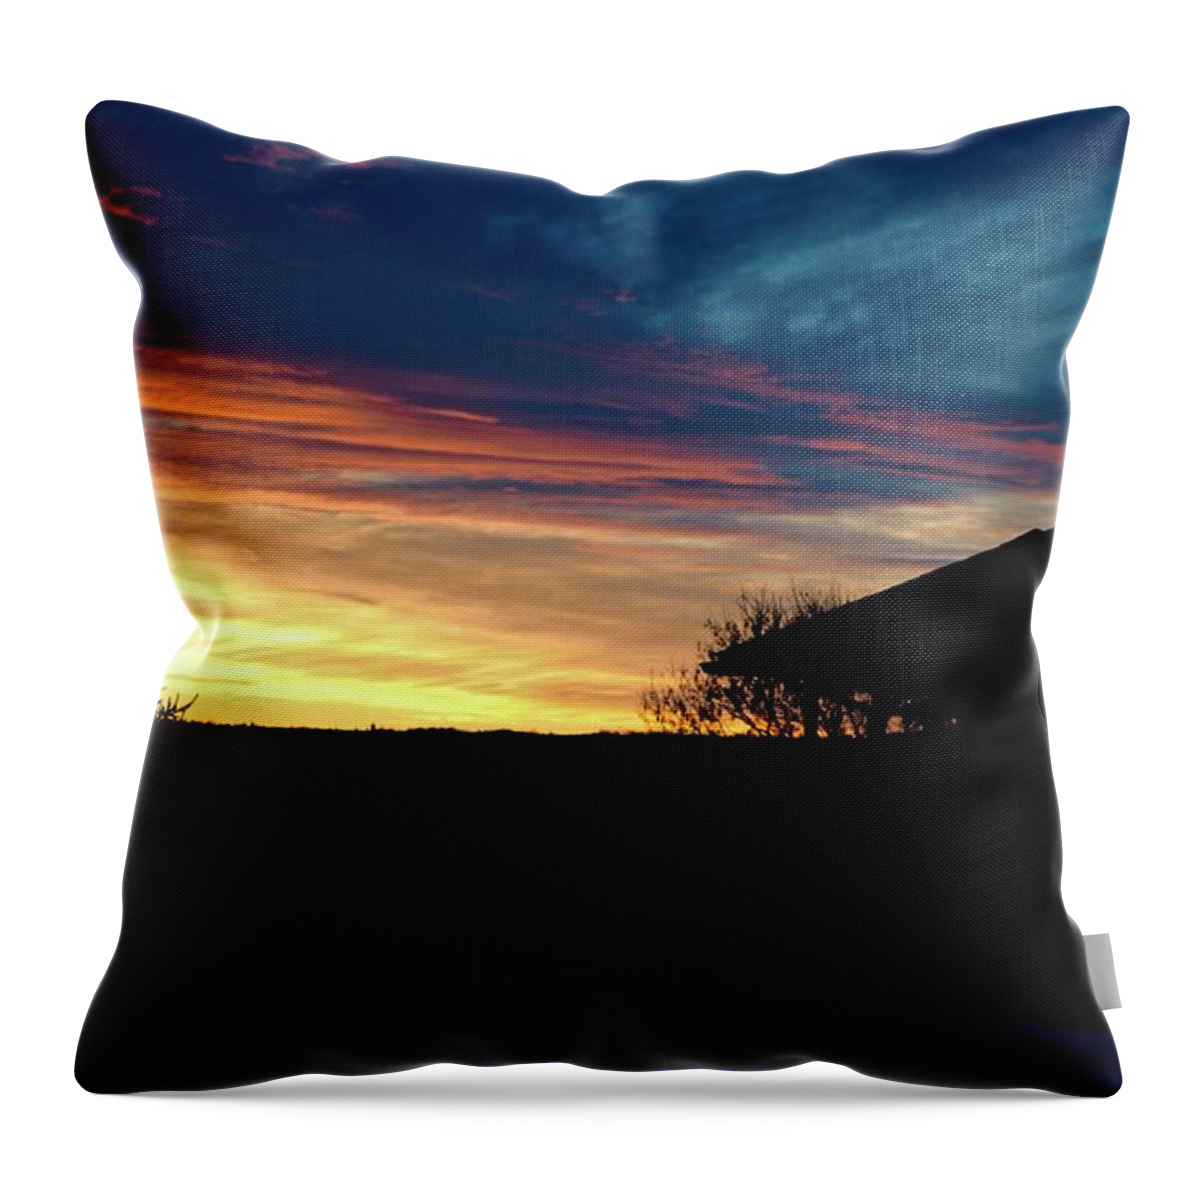  Throw Pillow featuring the photograph Farm House Sunset by Brian Sereda